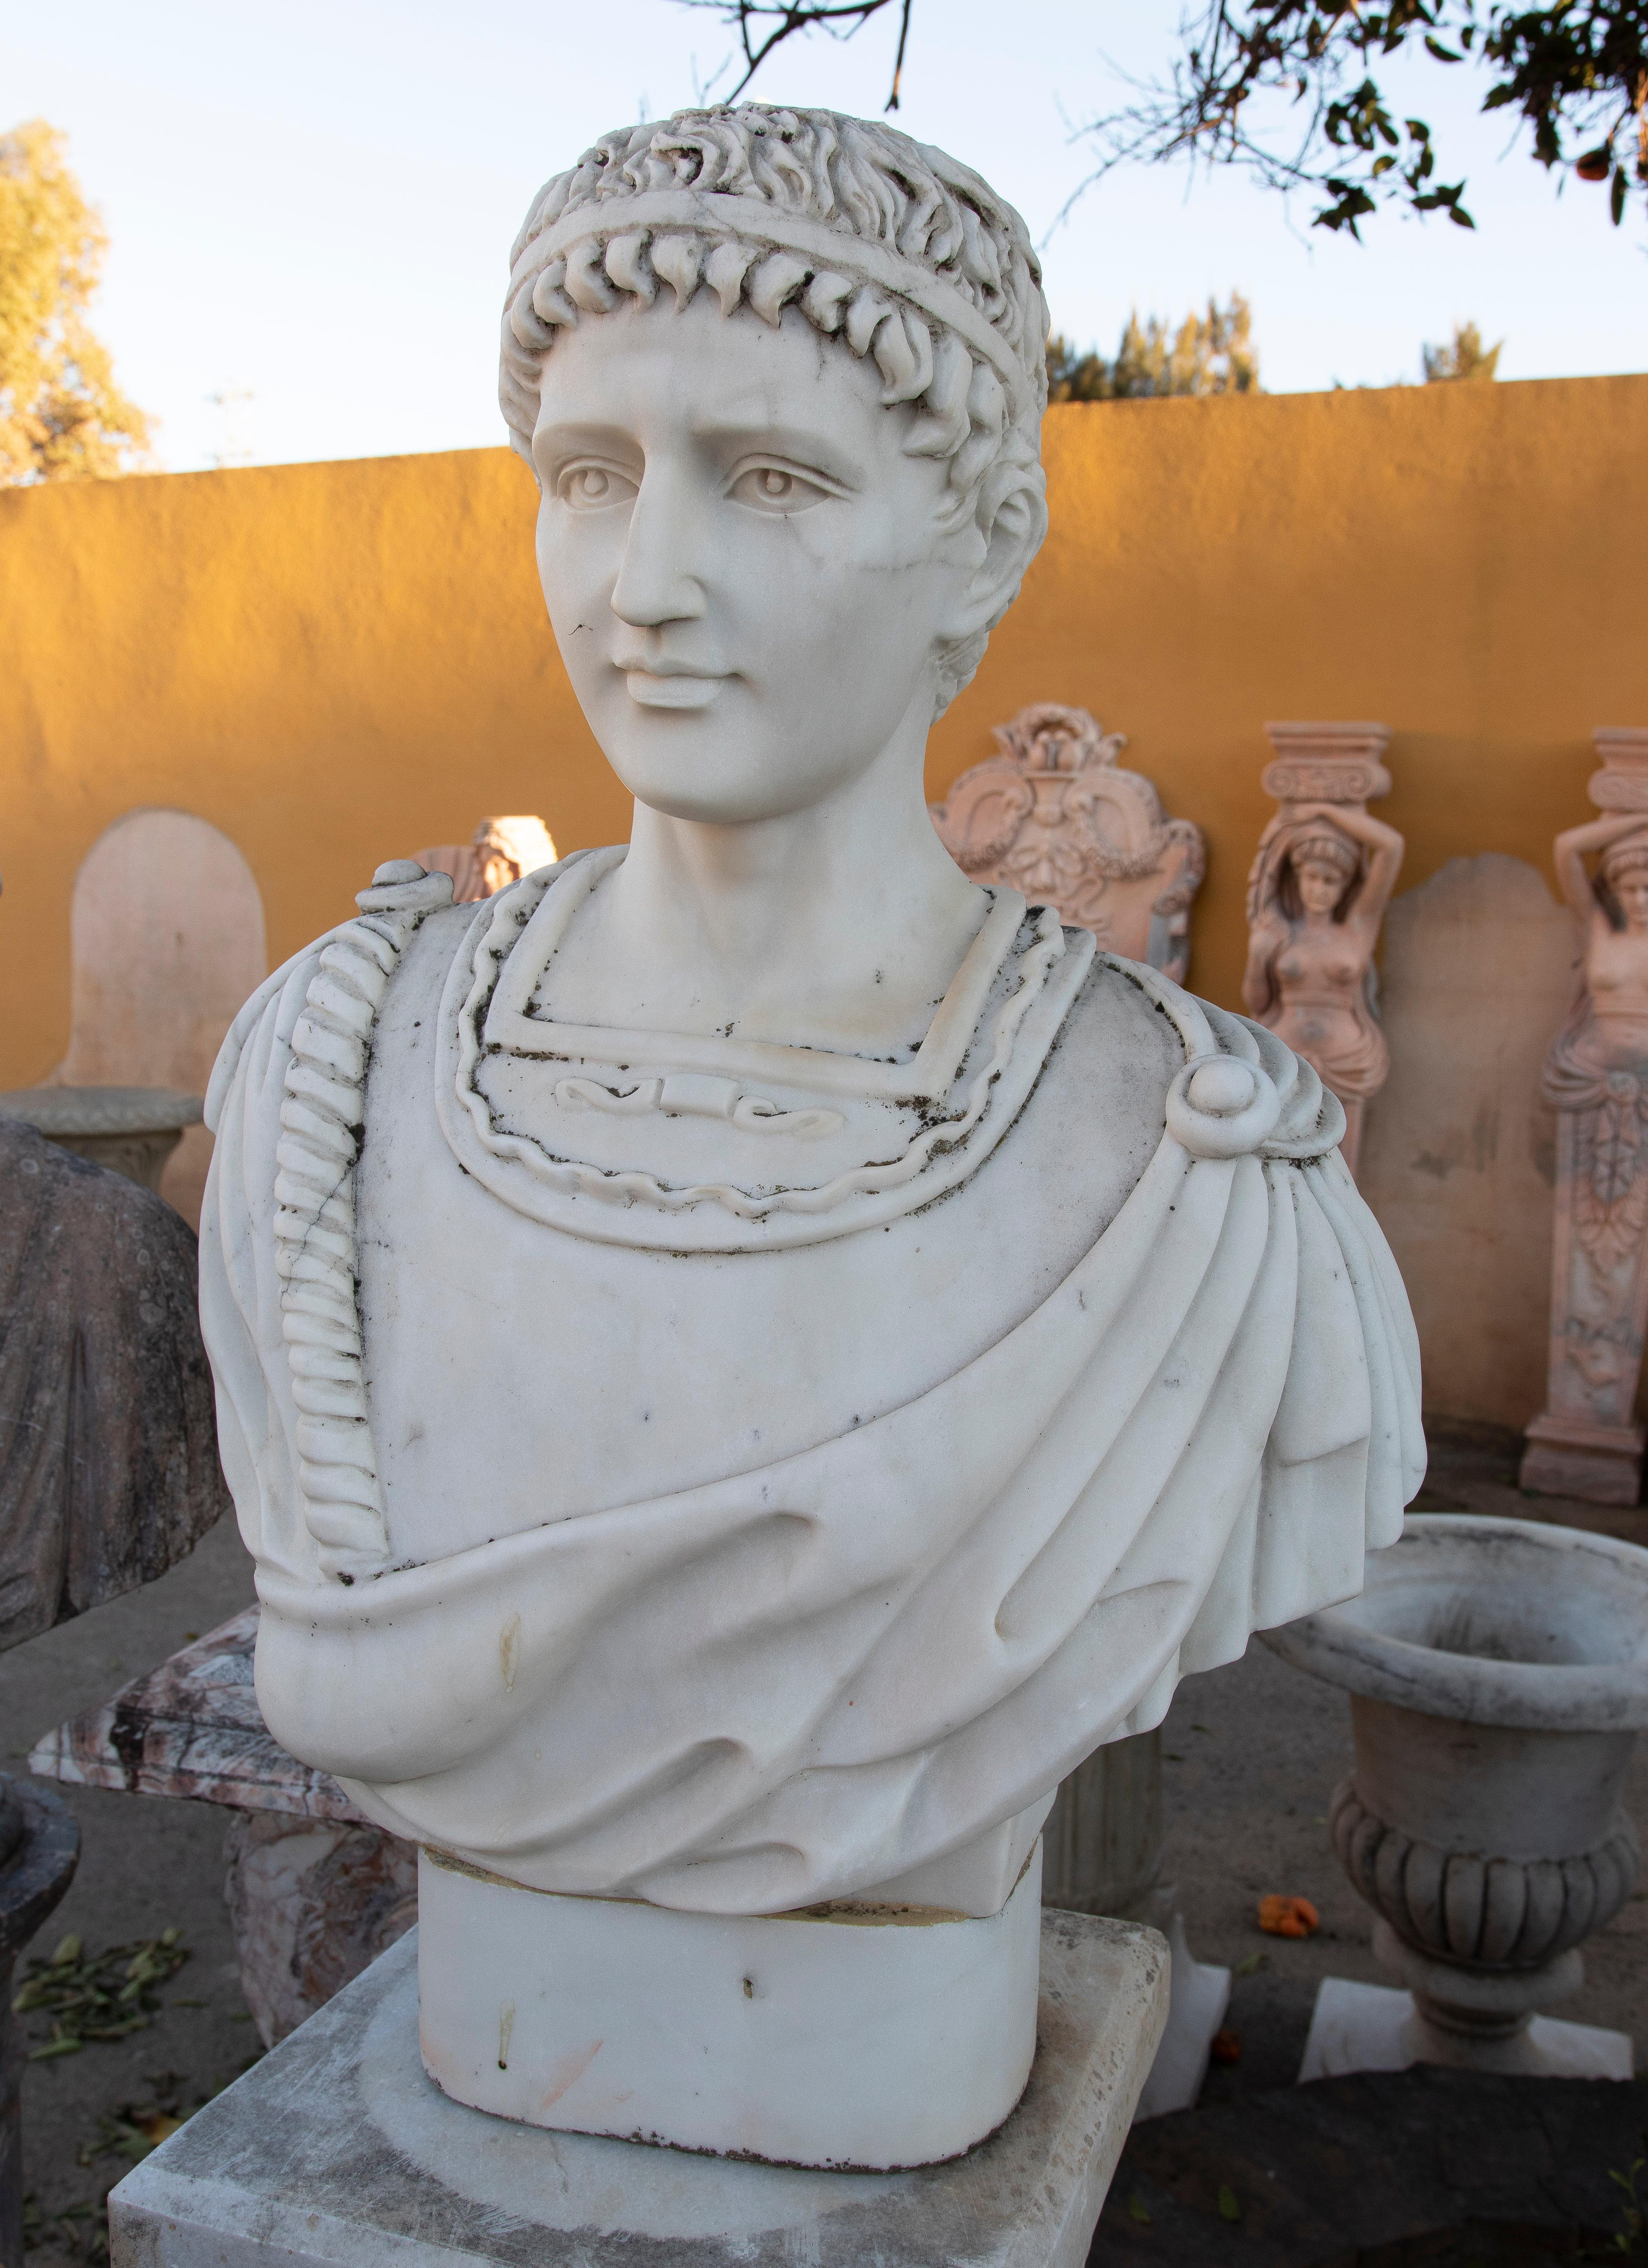 Bust of a Roman character with toga, hand carved in white marble.